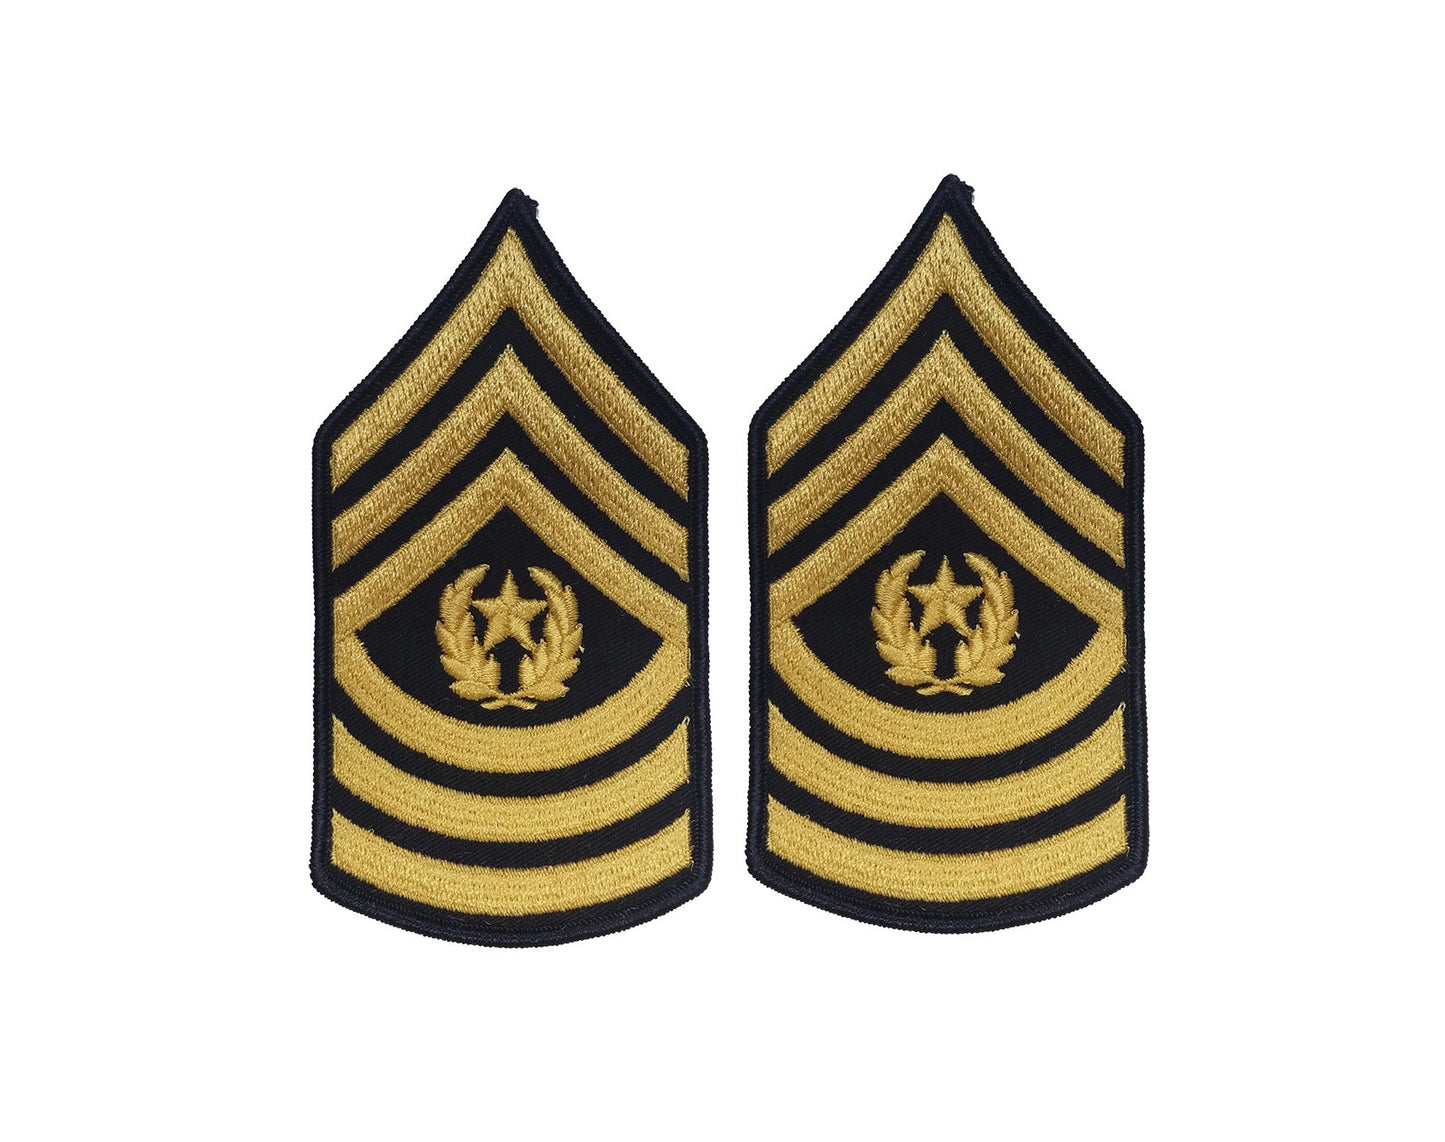 U.S. Army E9 Command Sergeant Major ok in Gold on Blue Sew-on - Male (Large)